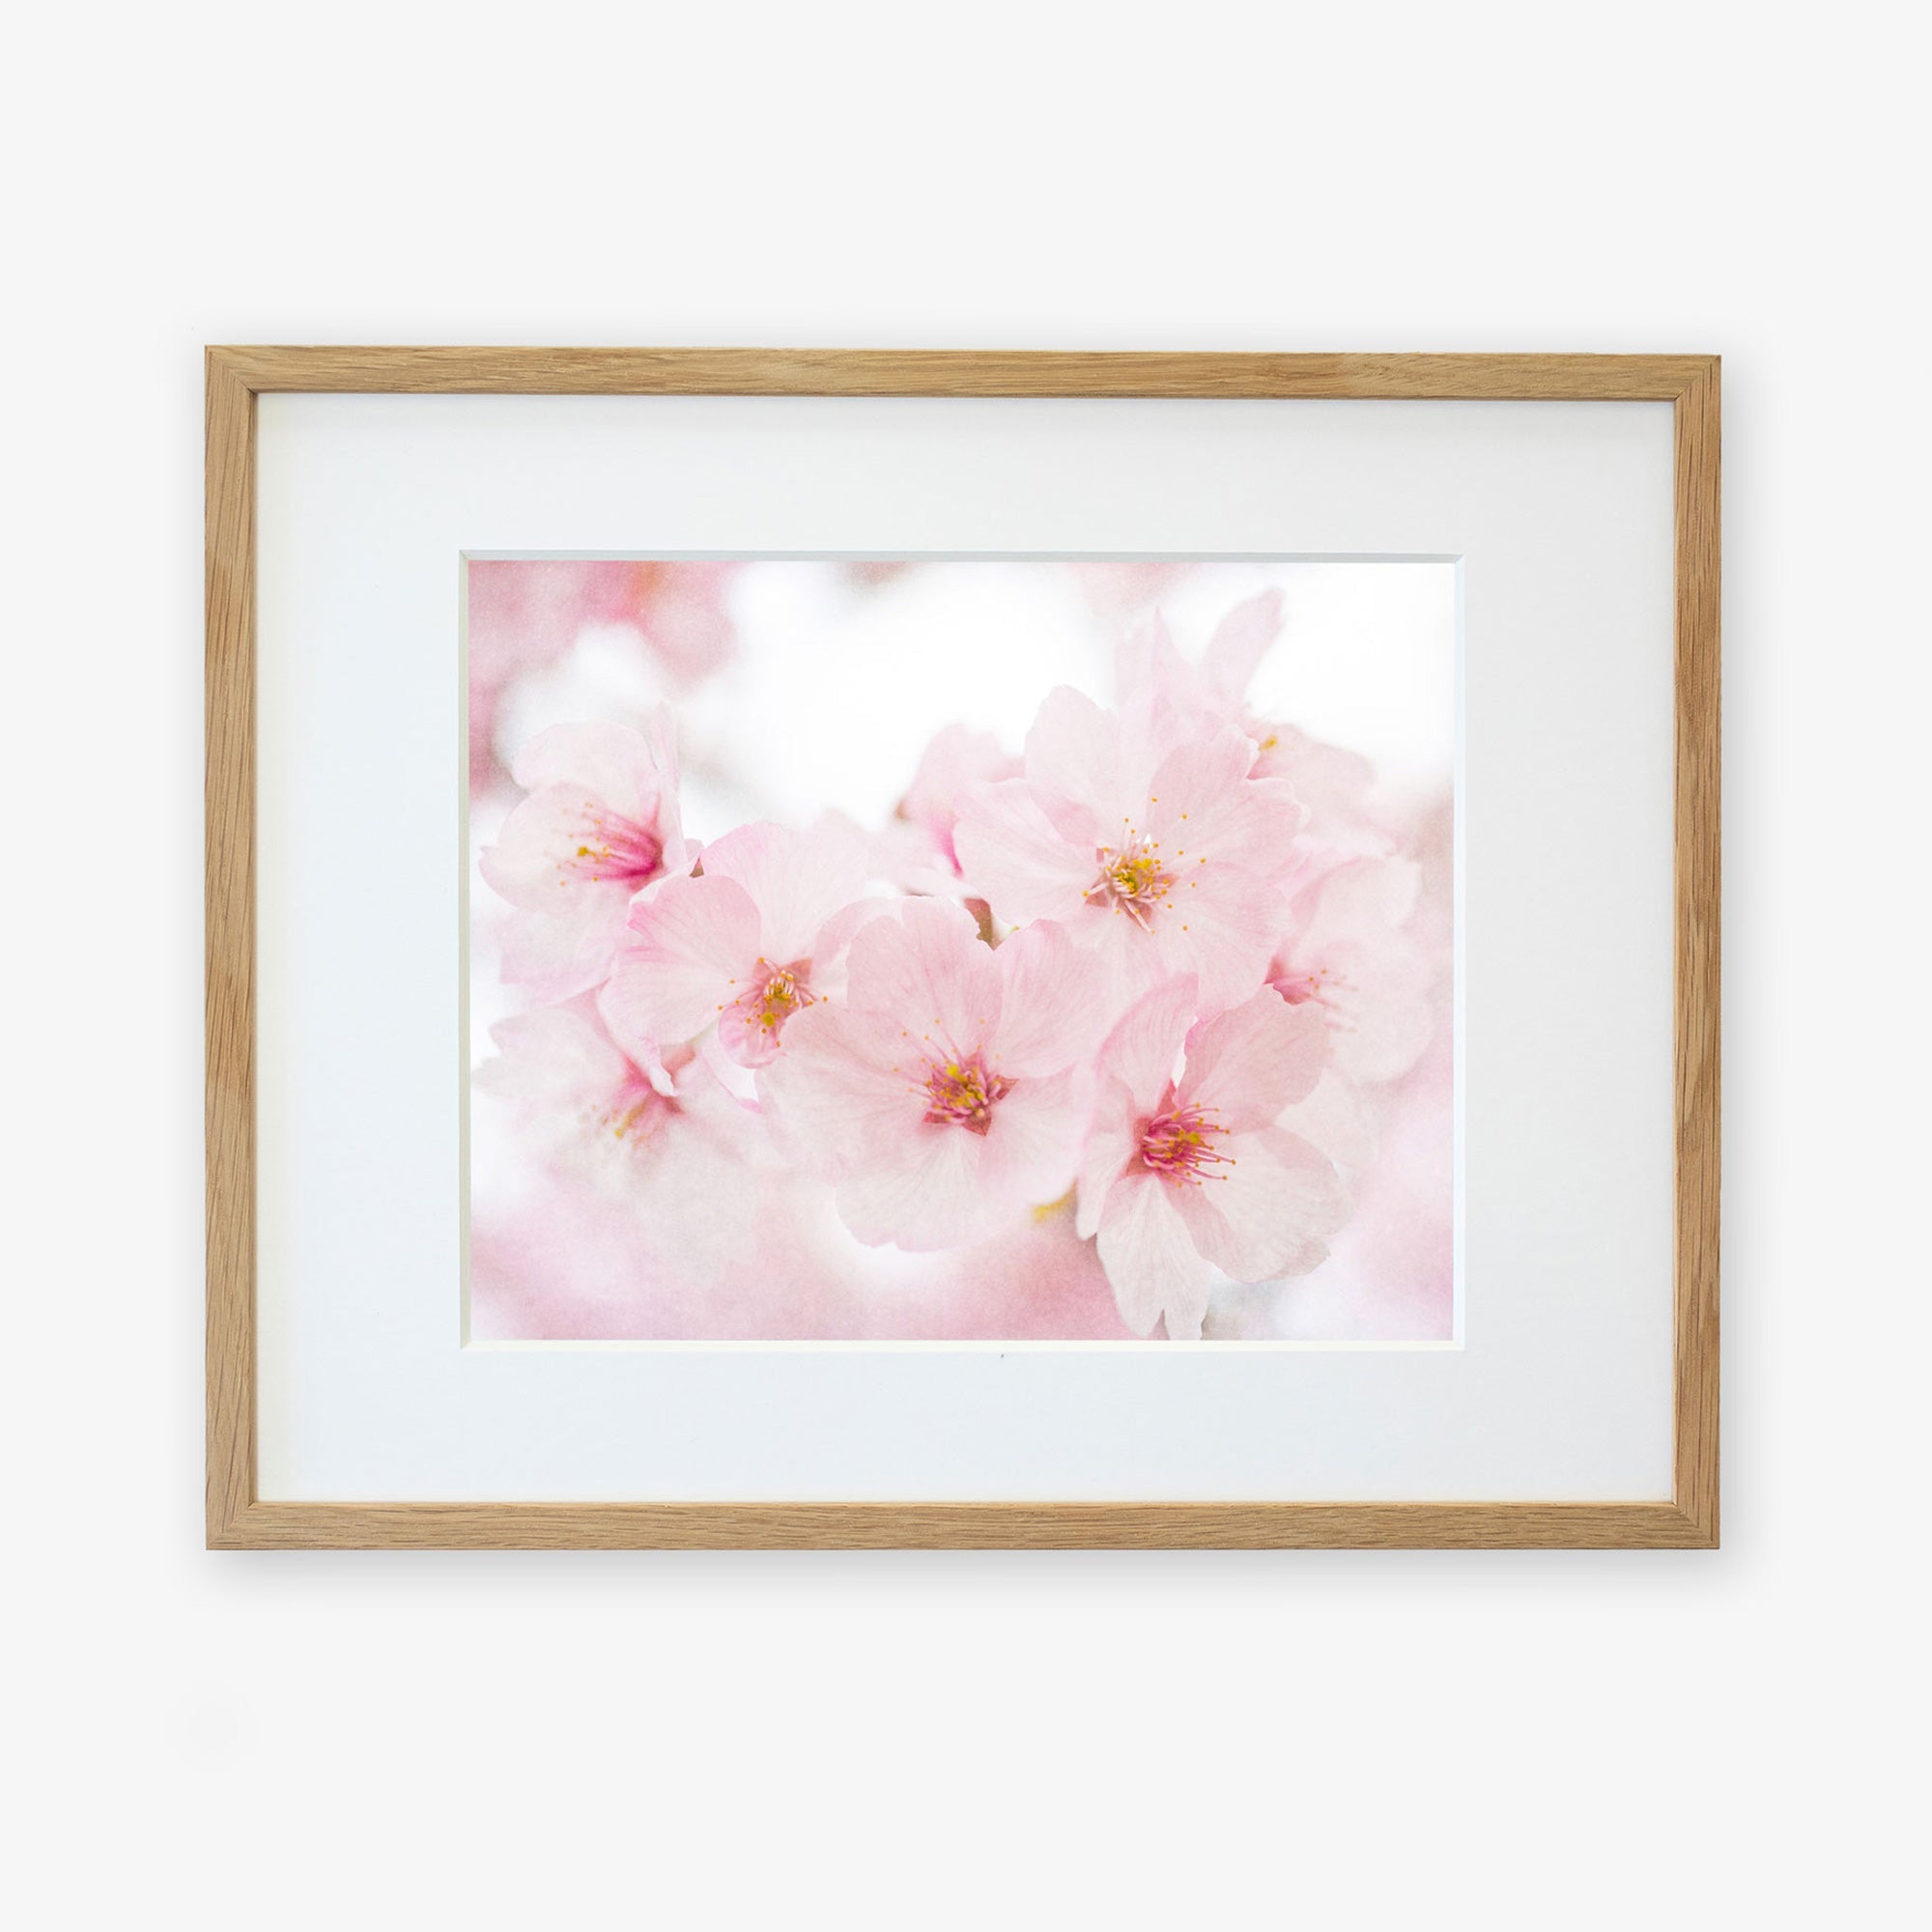 A framed photograph of delicate Pink Flower Print, &#39;Cherry Blossom&#39;, printed on archival photographic paper, with soft focus on shabby pink petals and visible stamens, set within a light wooden frame against a white background by Offley Green.